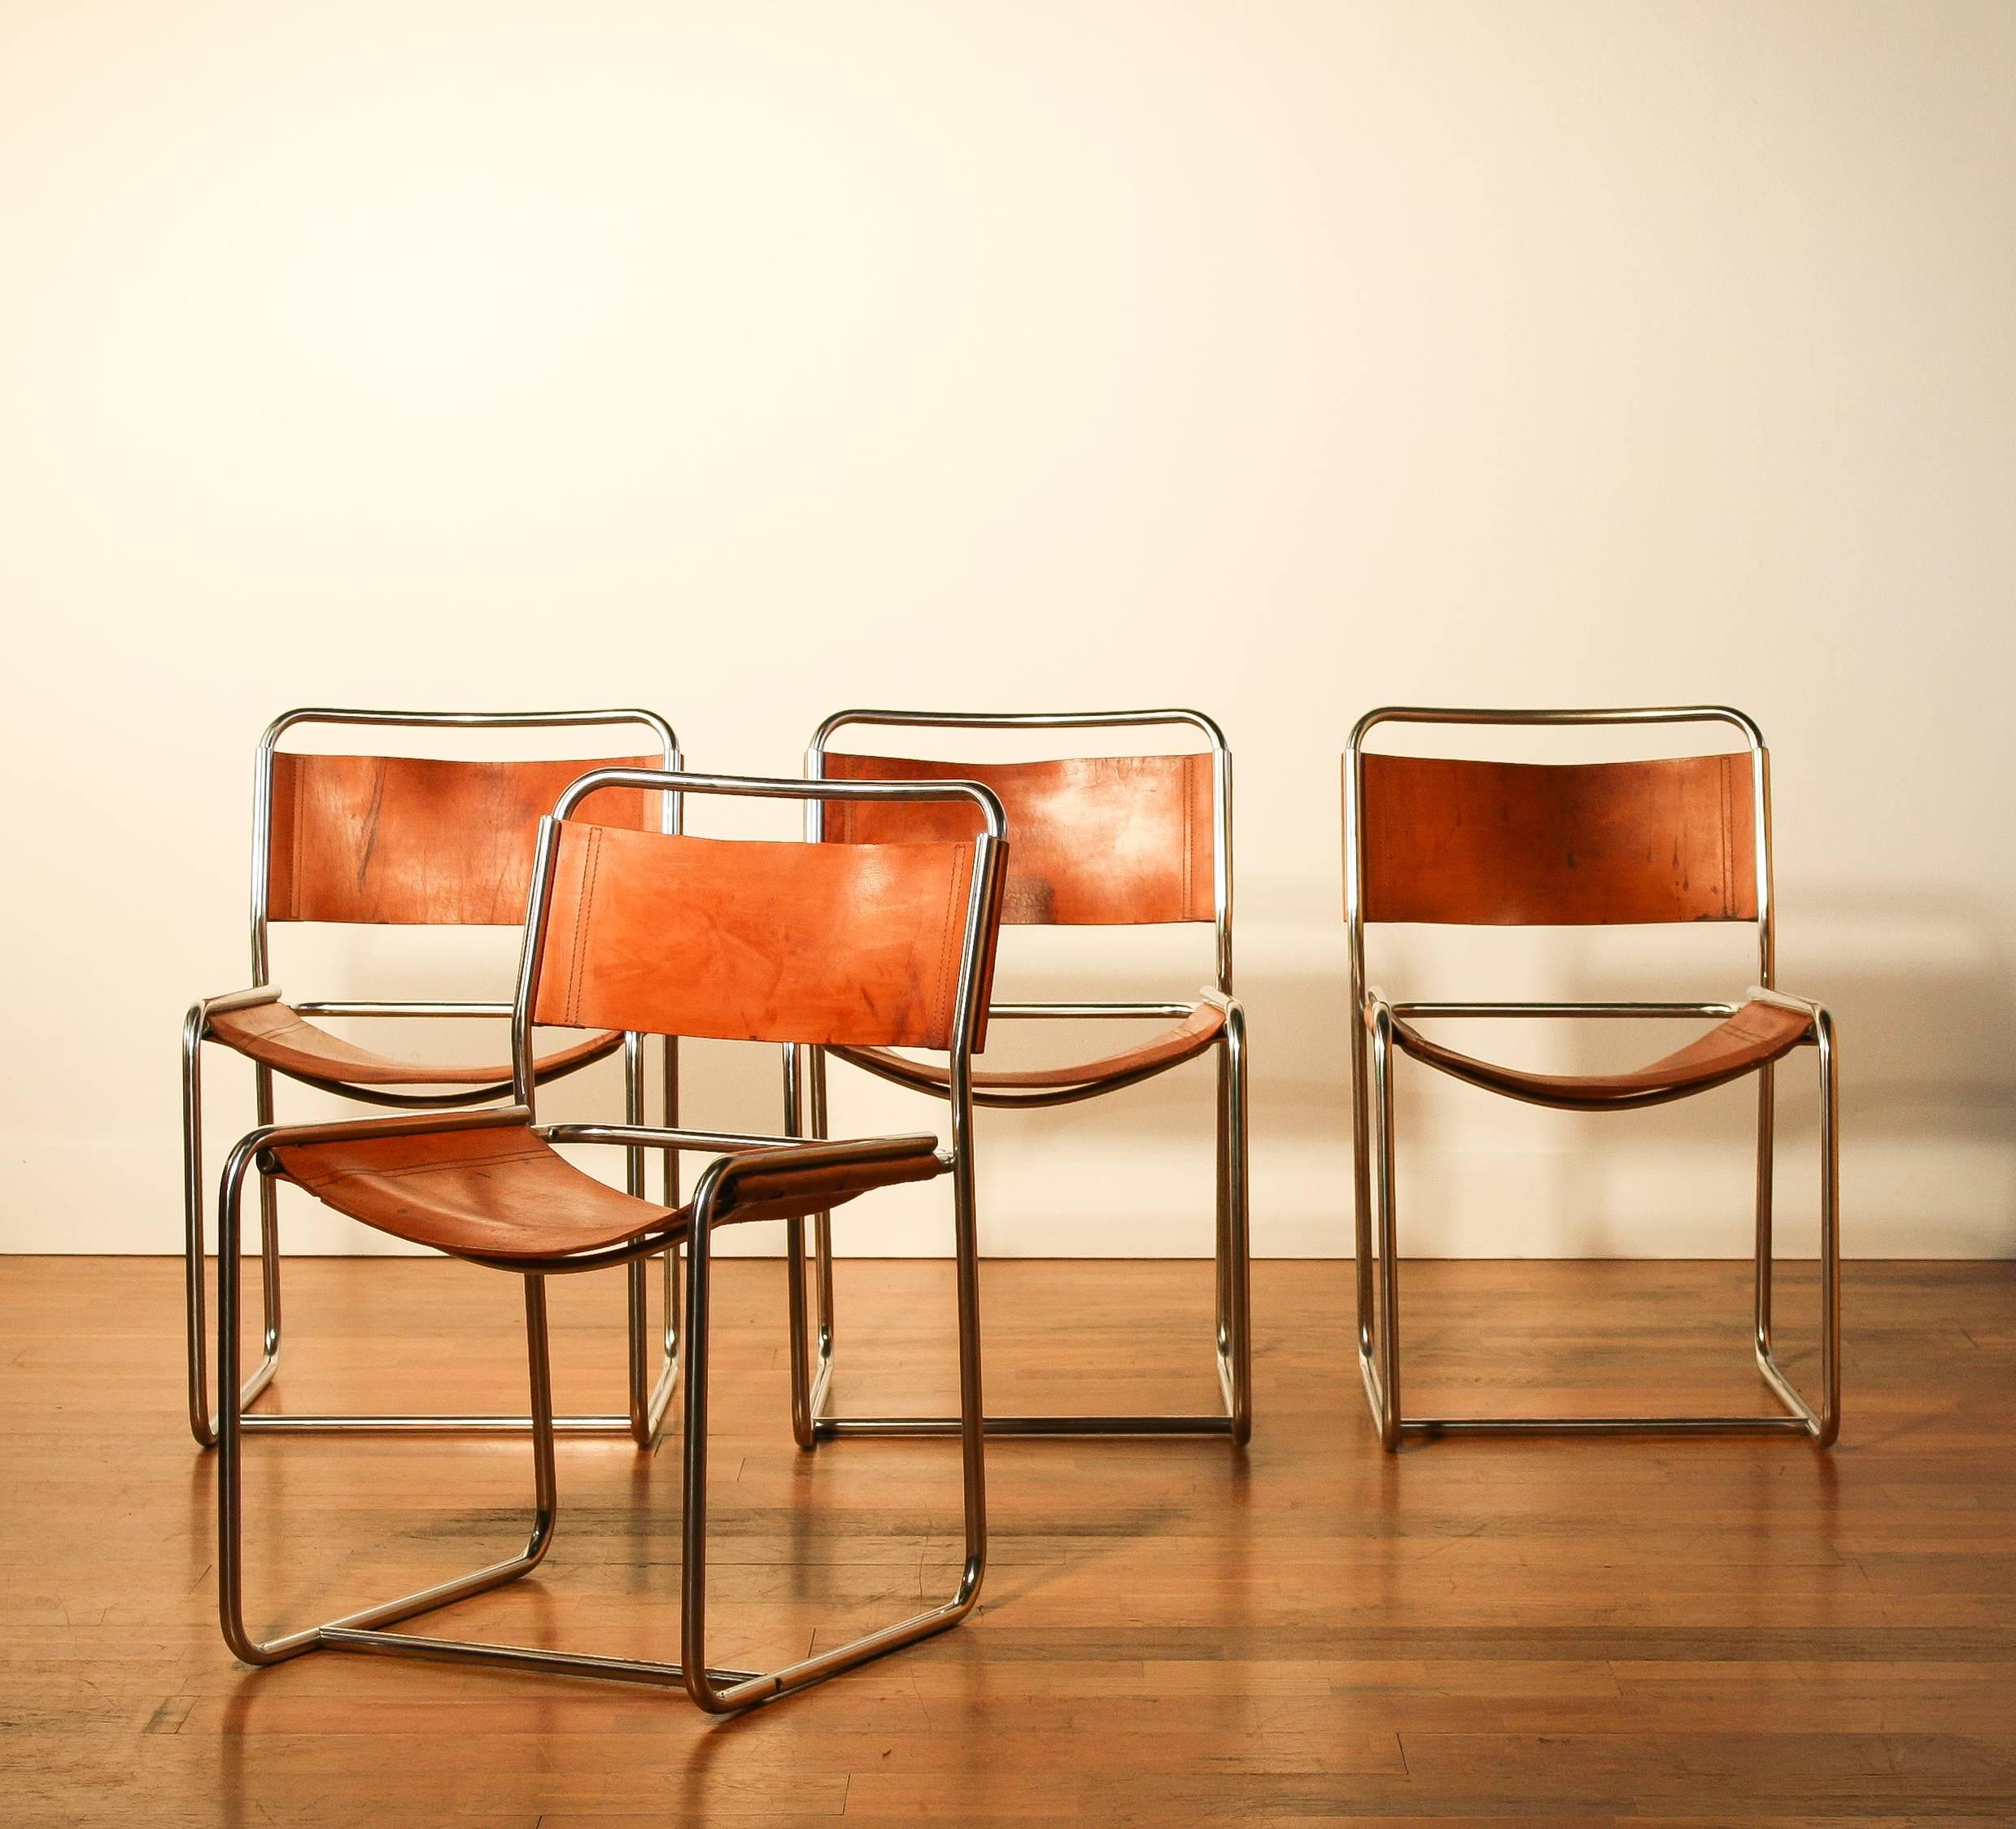 A nice set of four dining chairs designed by Paul Ibens & Clair Bataille.
The seat and the backrest are made of sturdy cognac leather. 
The frame consists of steel tube that is shaped like a cube. 
The chairs are in a very nice used